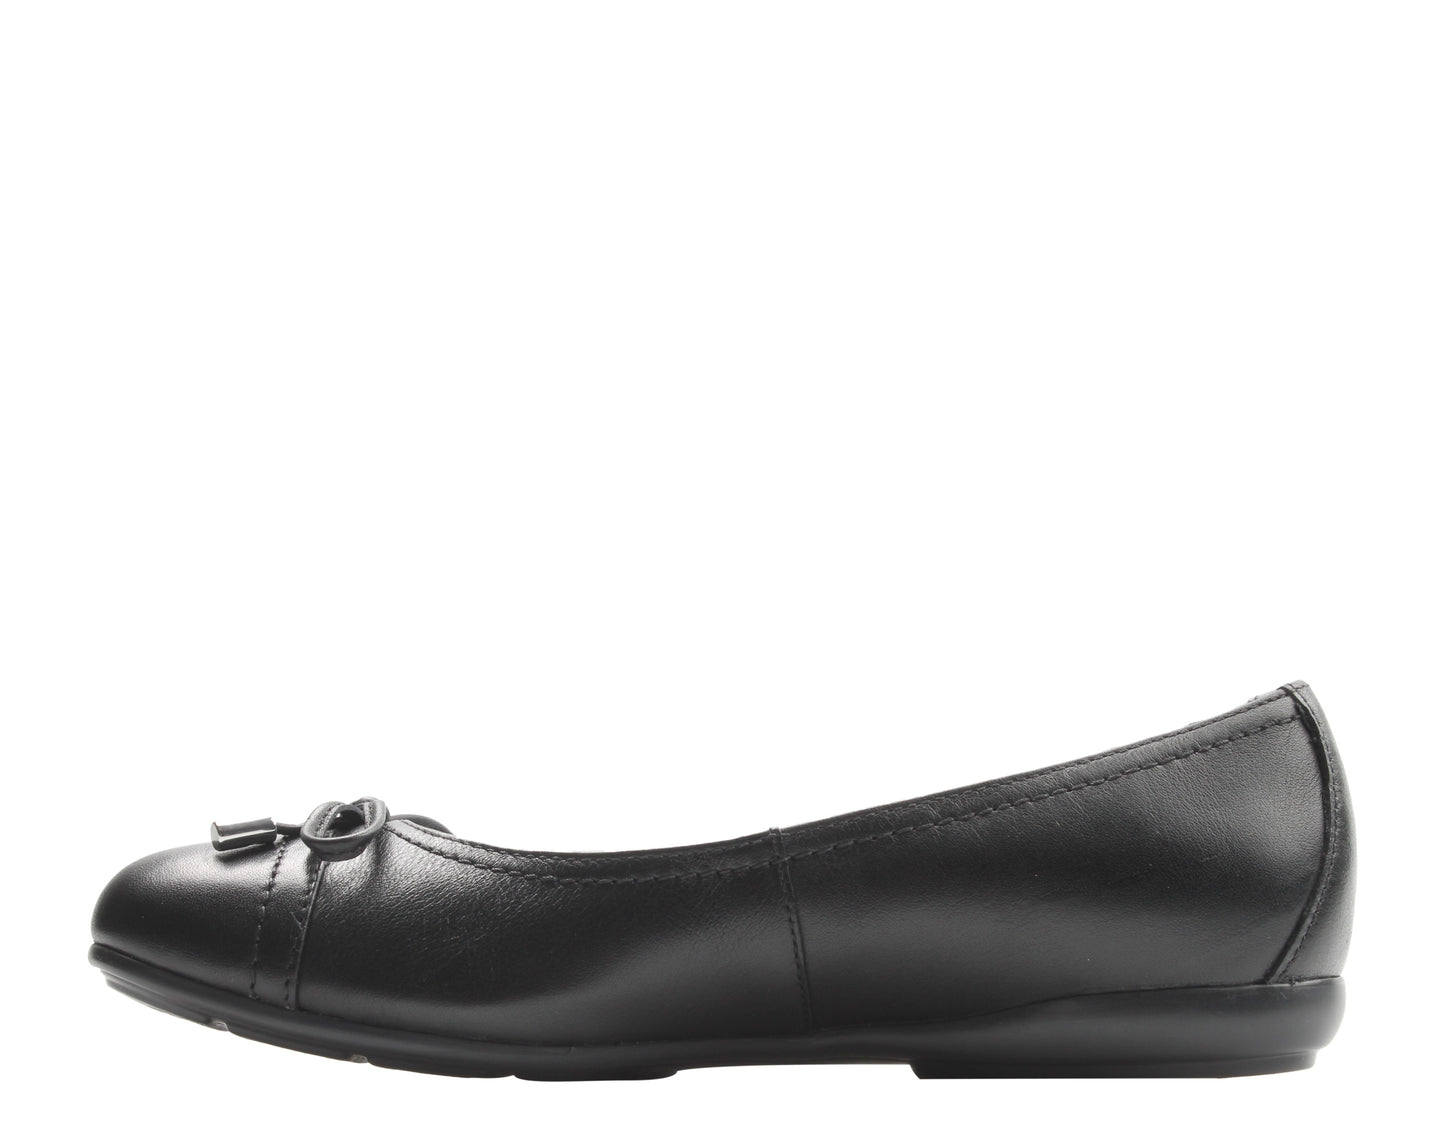 Geox Annytah Ballet Flat Black Leather Women's Casual Shoes D927ND-00085-C9997